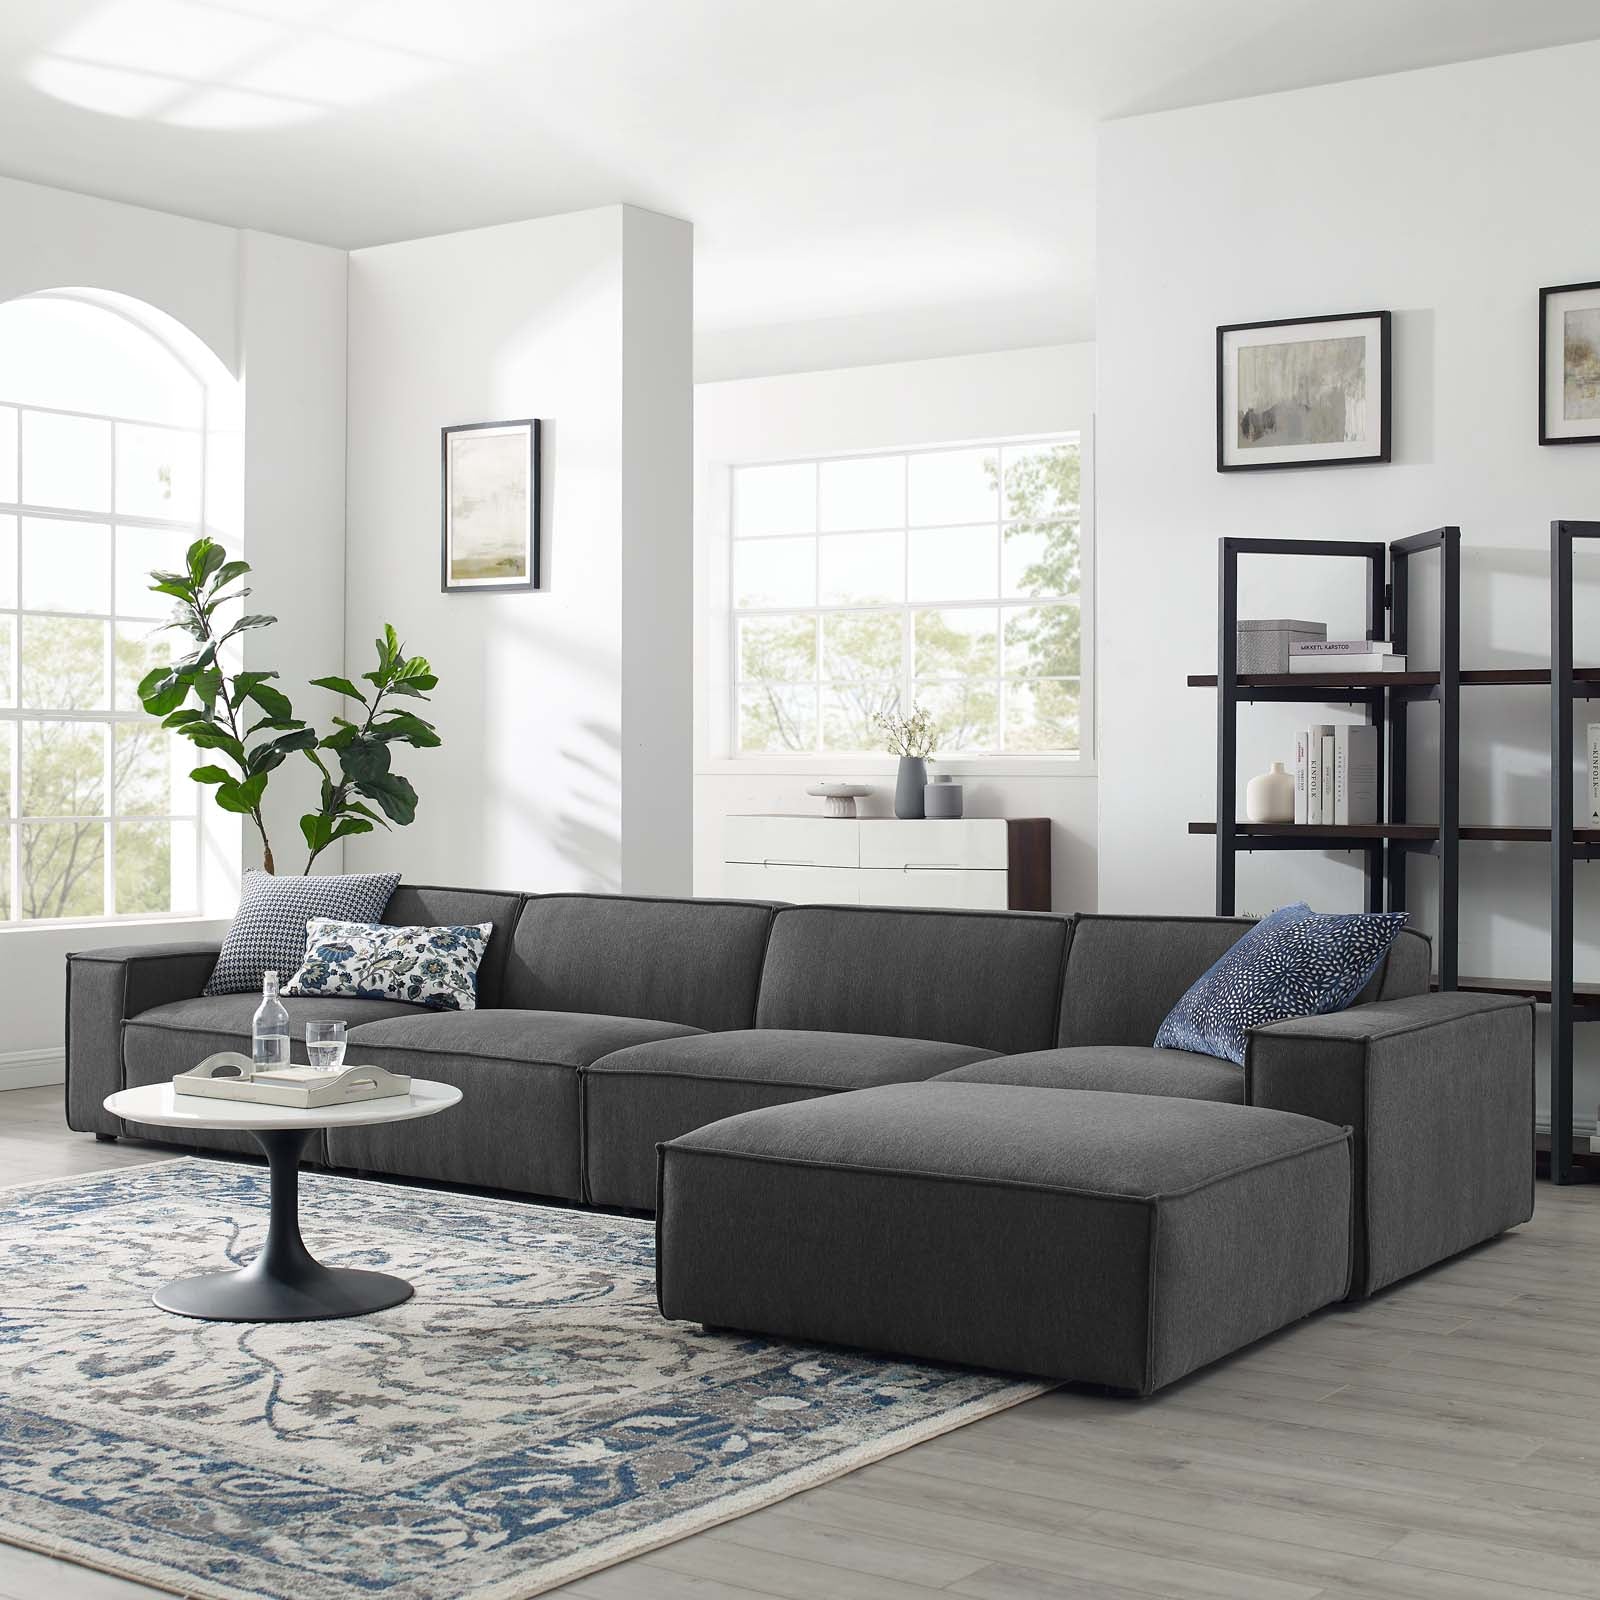 Re 5 Piece Sectional Sofa